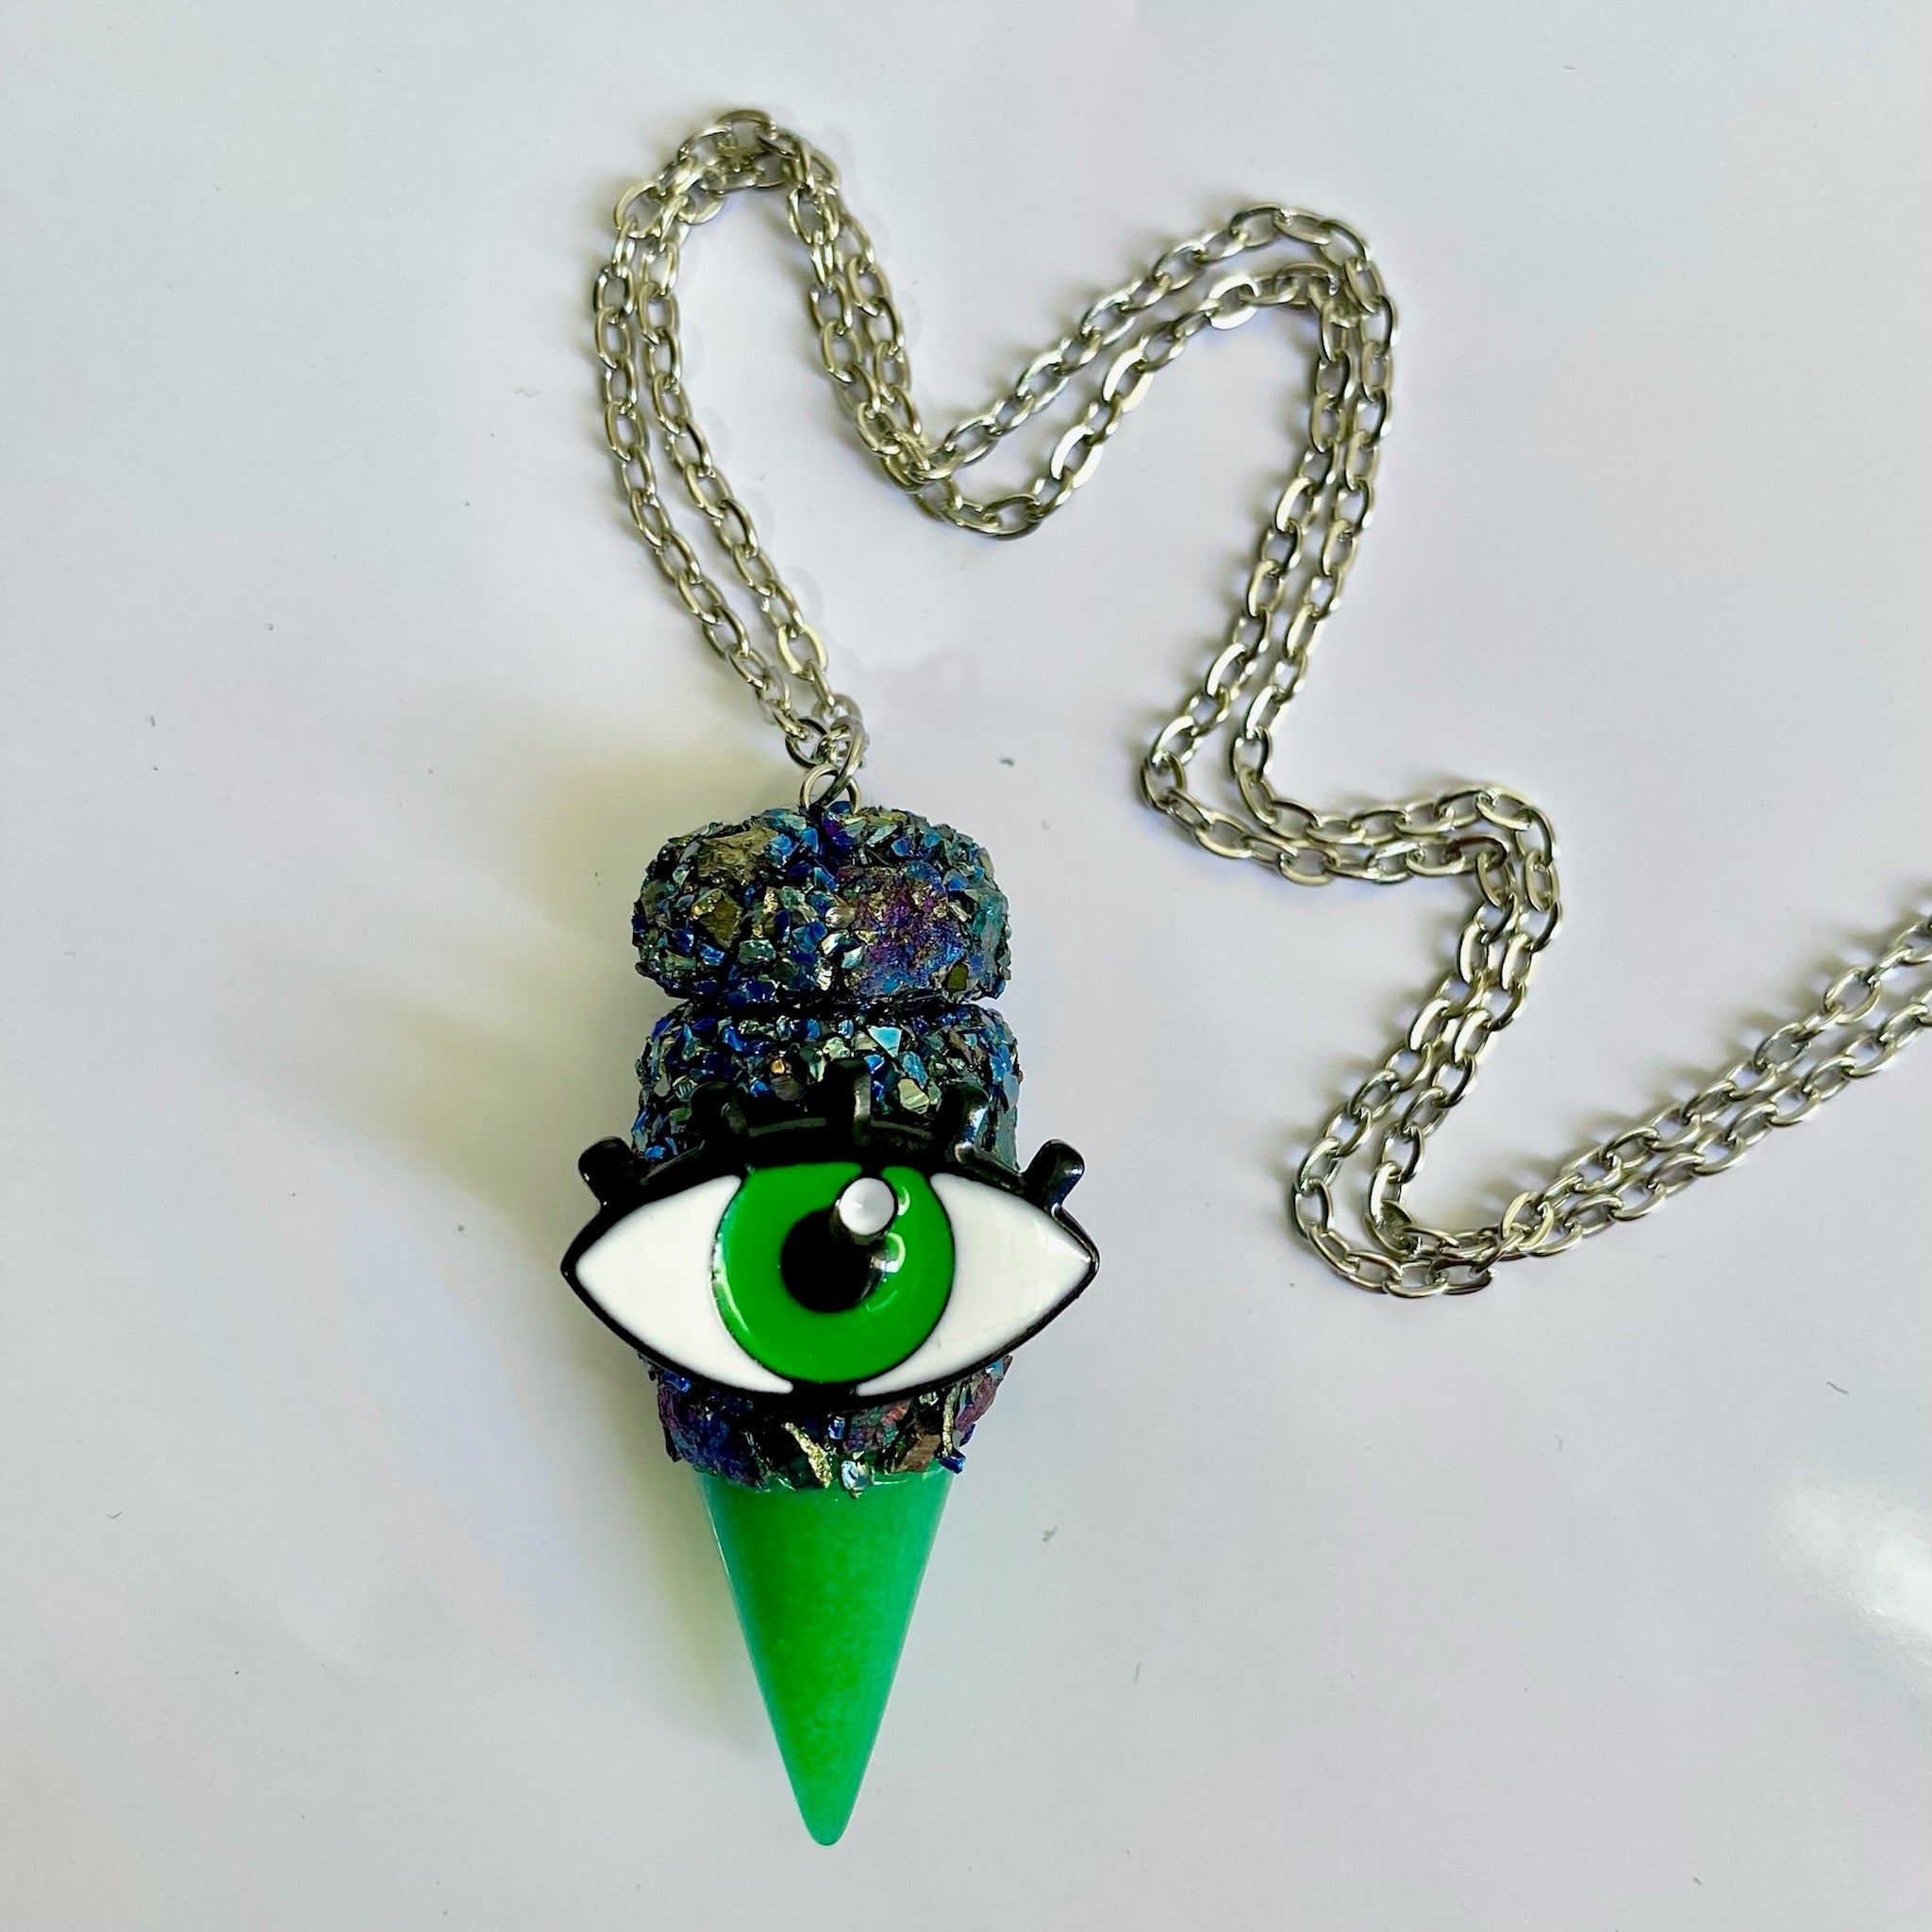 Container Necklace with Spoon – Rave Fashion Goddess